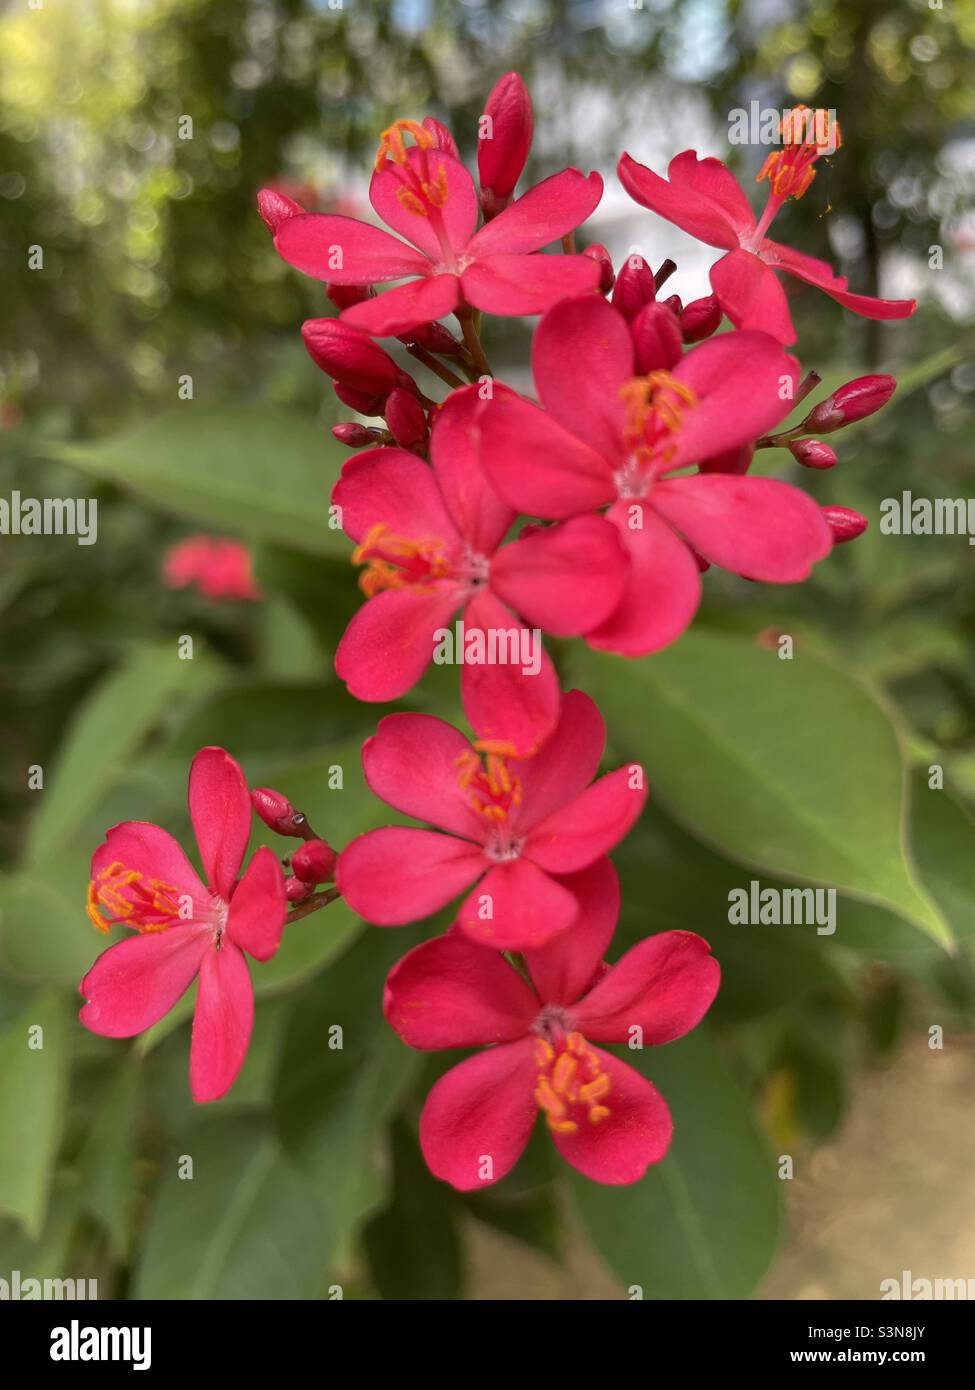 Cherry red flowers in a Singapore garden Stock Photo